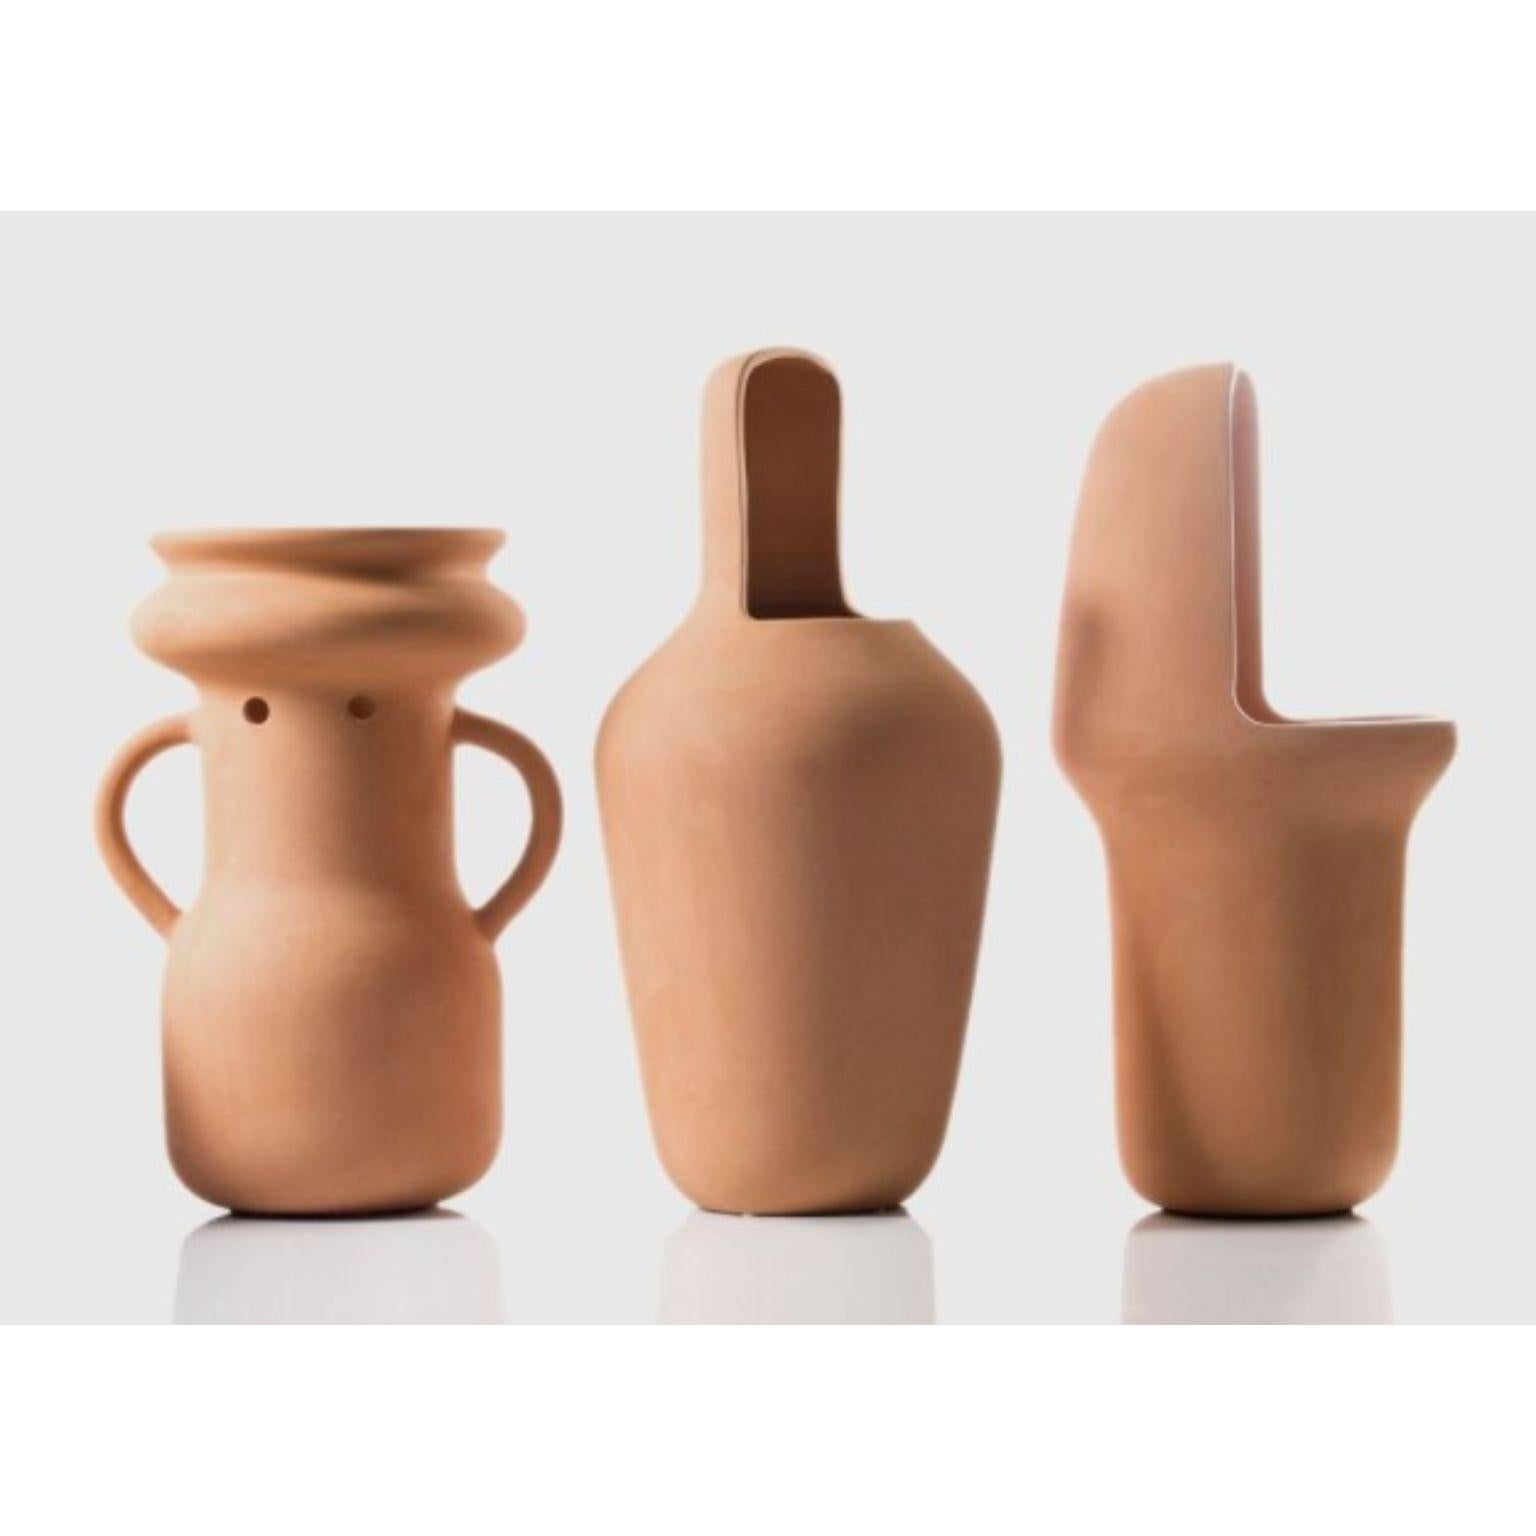 Set of Gardenia vases by Jaime Hayon 
Dimensions: D22 x H45 cm, D22 x h45 cm ,D26 x H37 cm 
Materials: Handmade terracotta with a waterproof treatment.
Could be used outdoors. 


Jaime Hayon designed the Gardenia Vases in terracotta as a